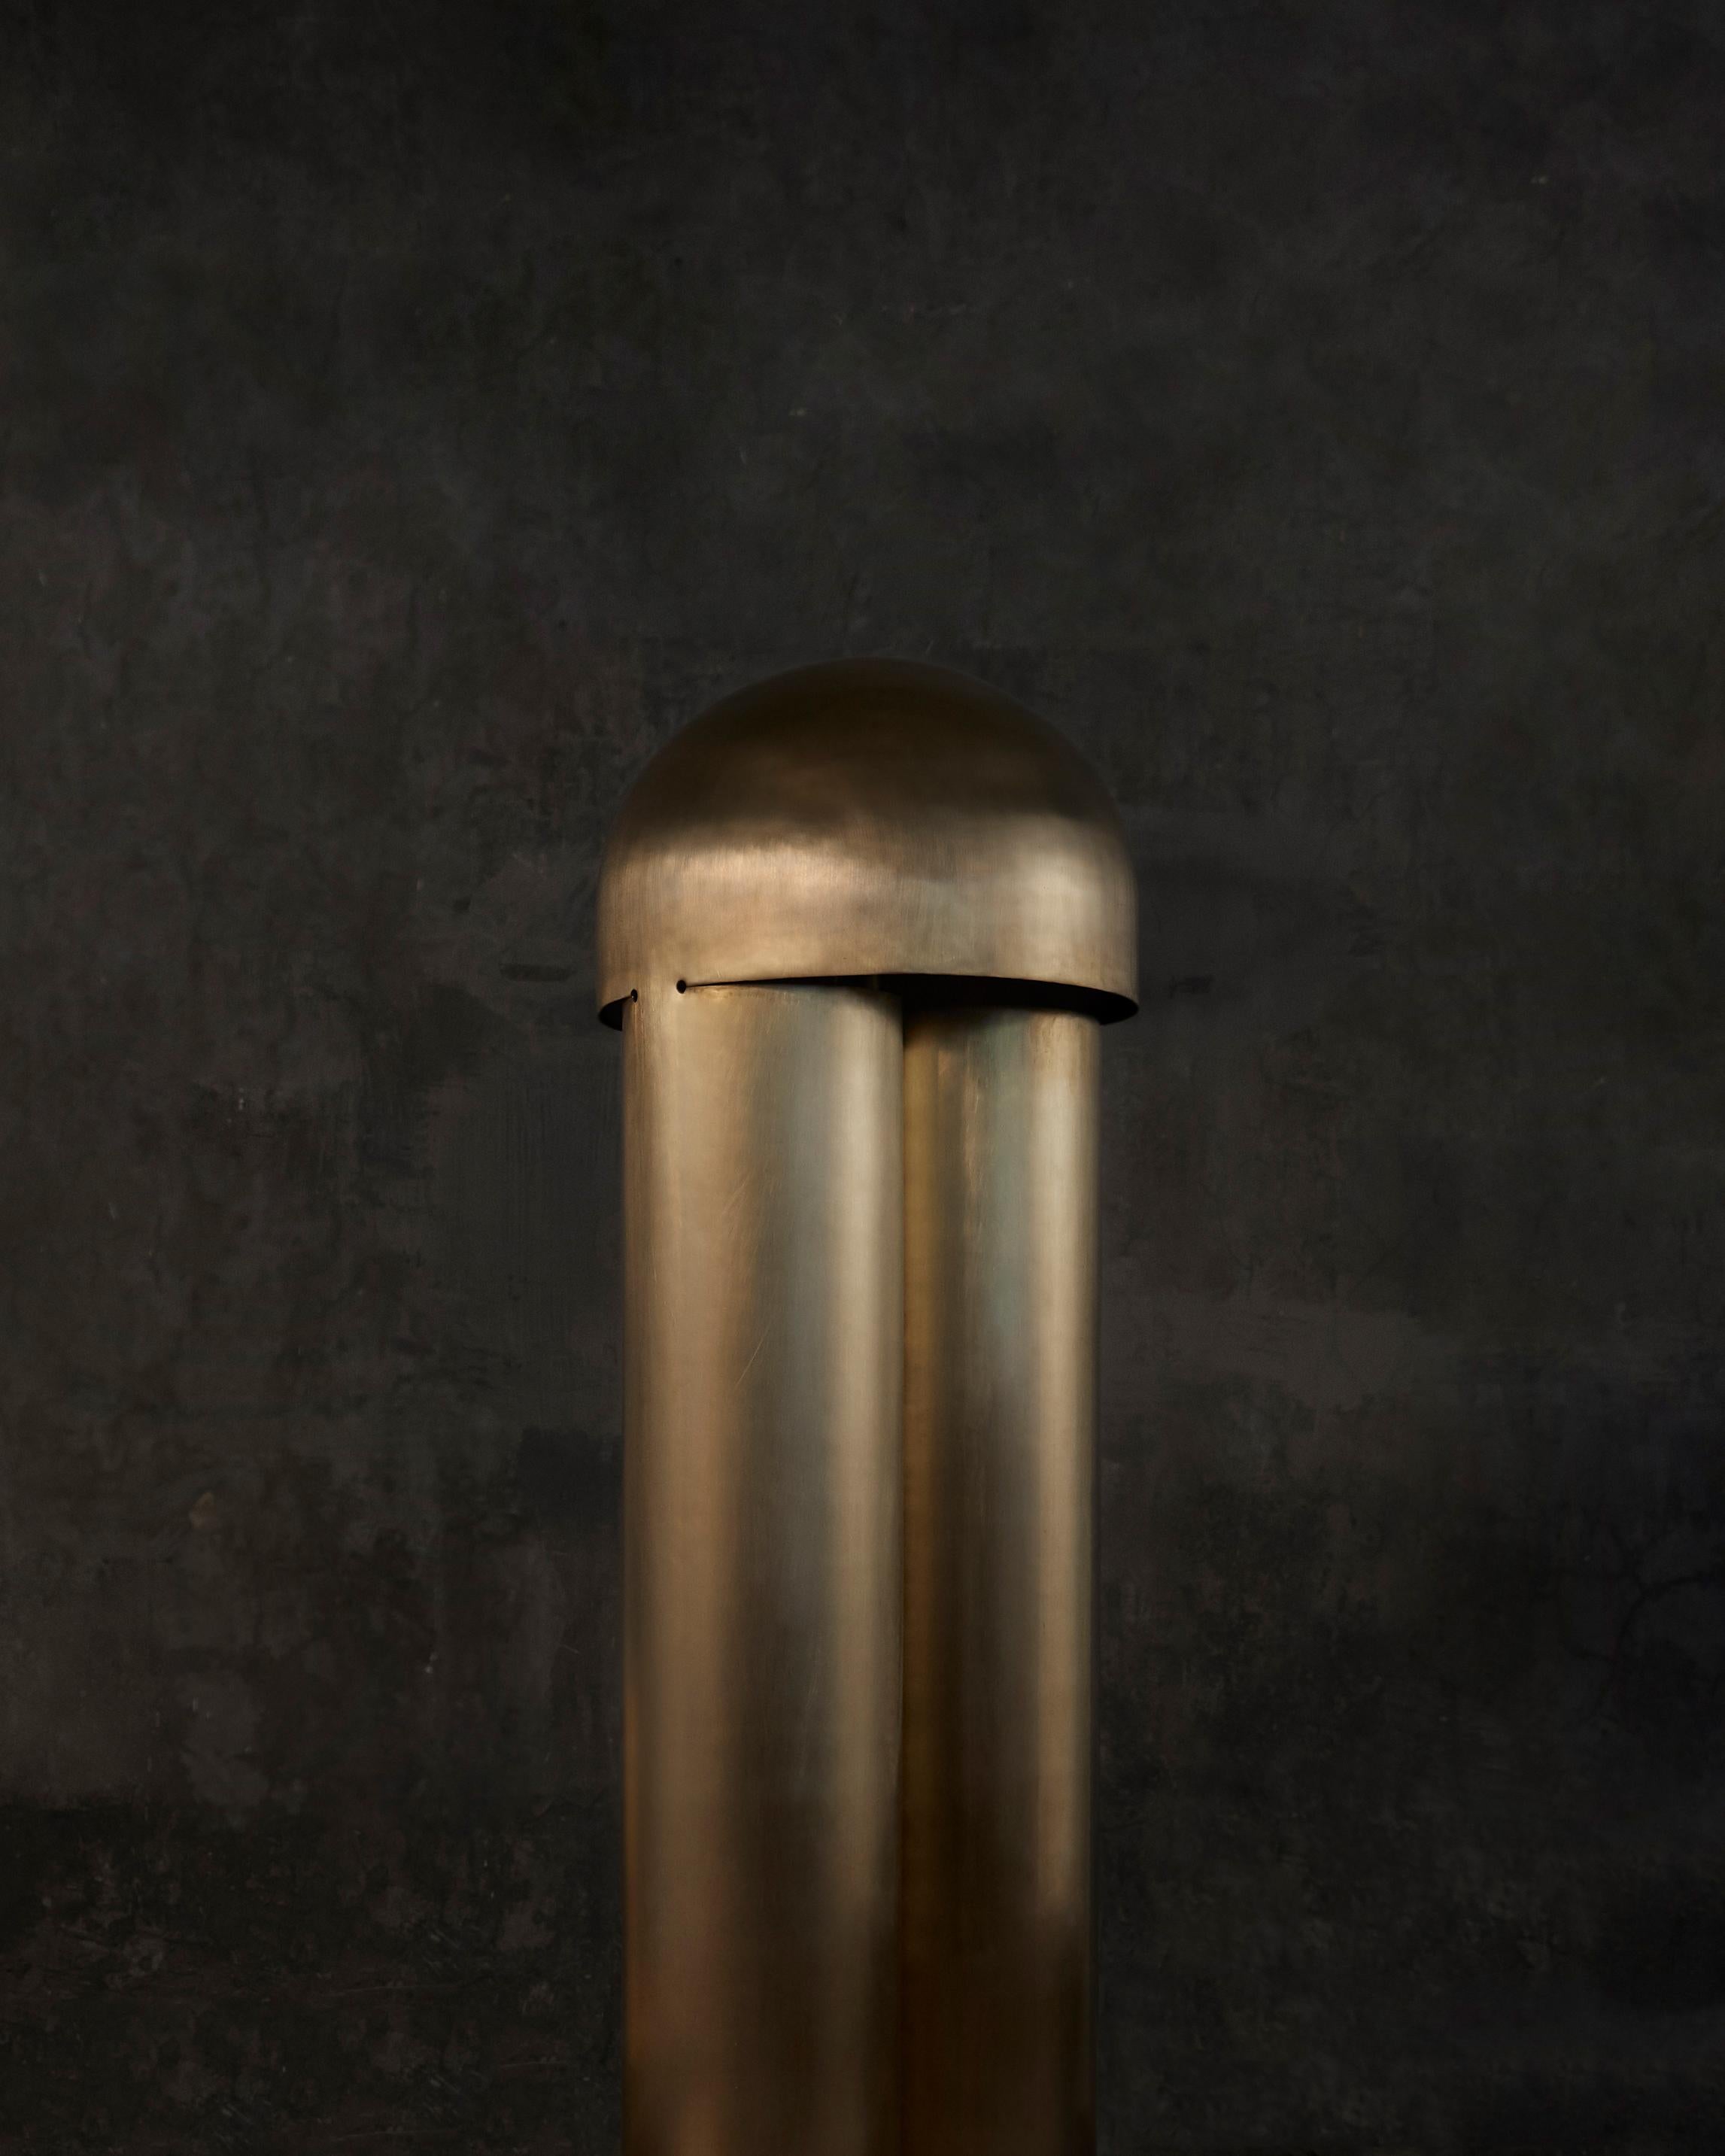 Large Monolith Brass Sculpted Table Lamp by Paul Matter For Sale 1